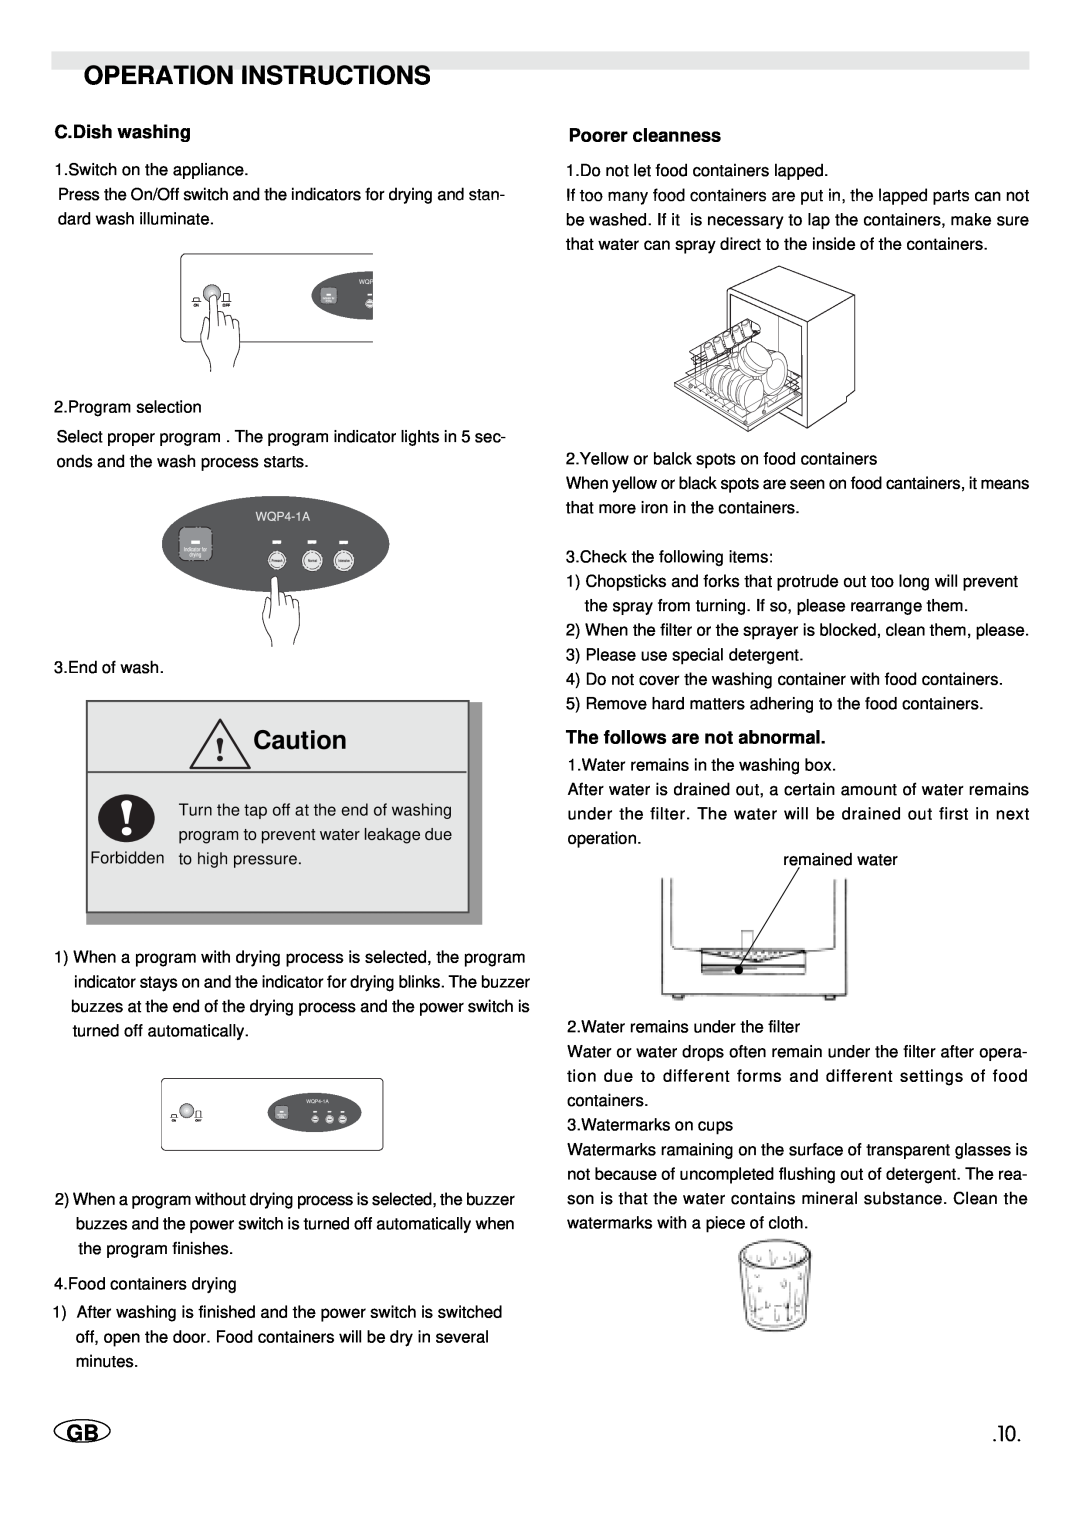 Haier WQP4-1A manual Operation Instructions, C.Dish washing, Poorer cleanness, The follows are not abnormal 